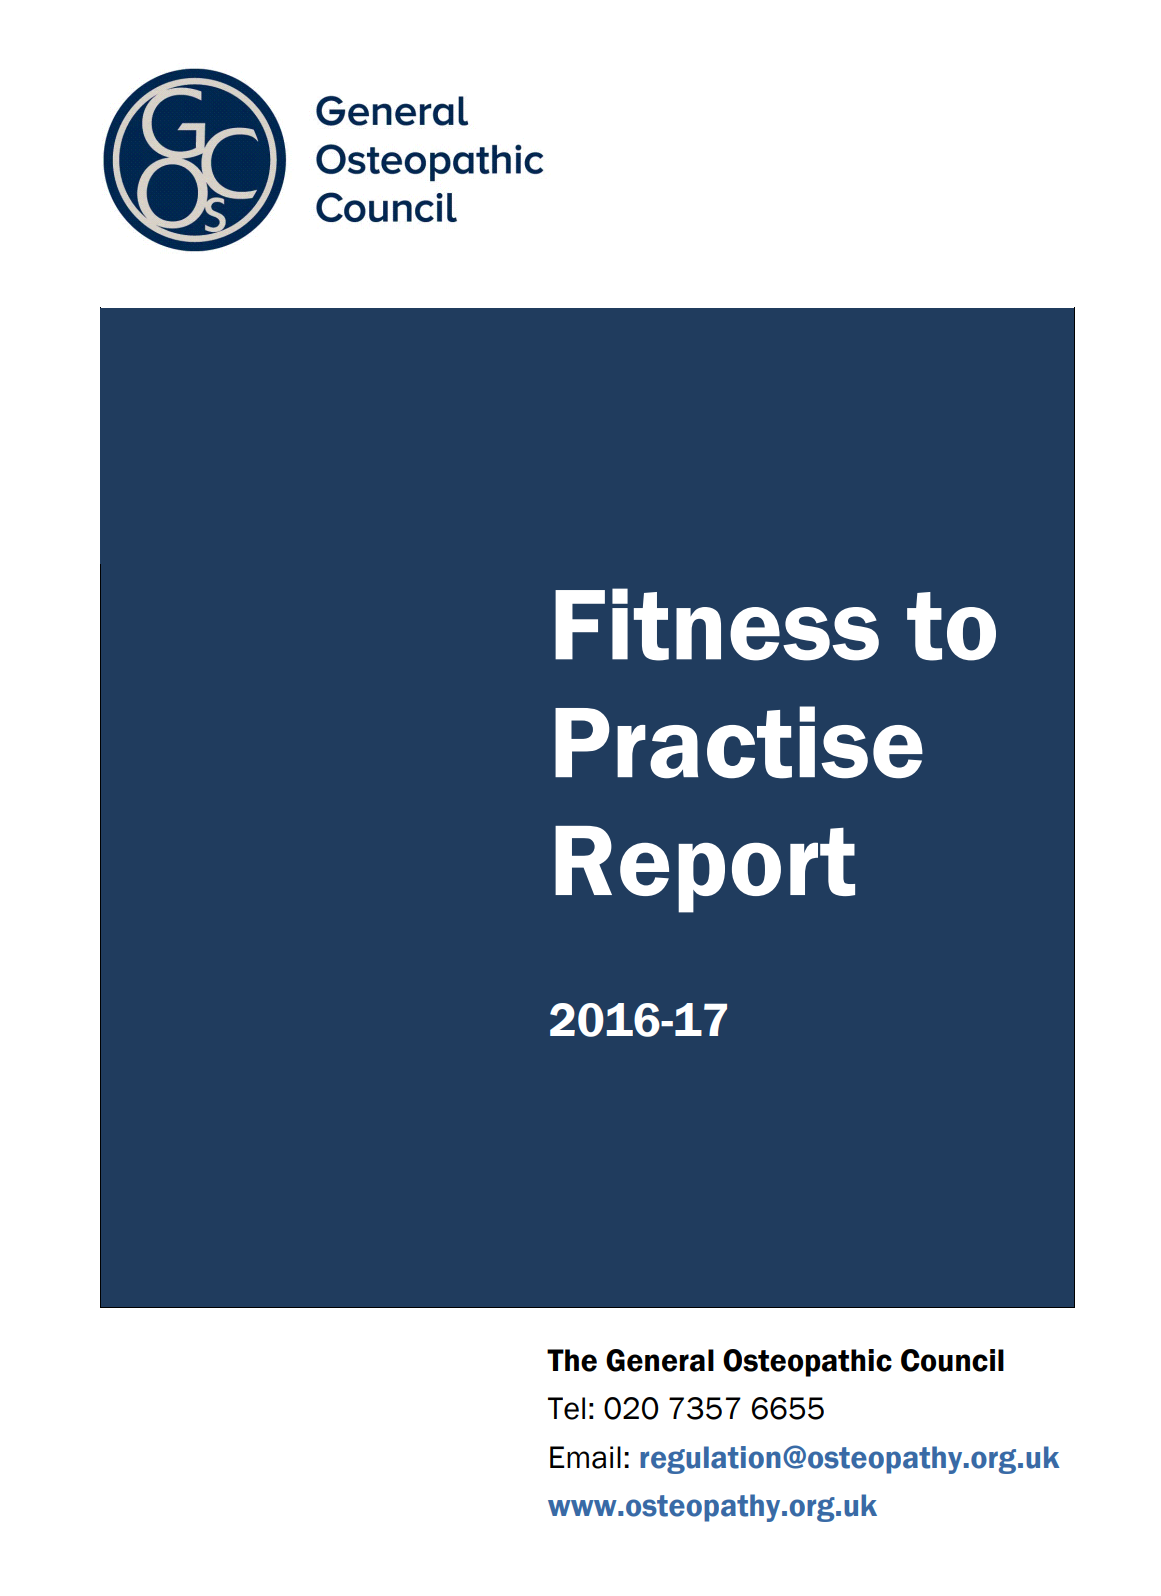 Fitness to practice annual report 2016-17